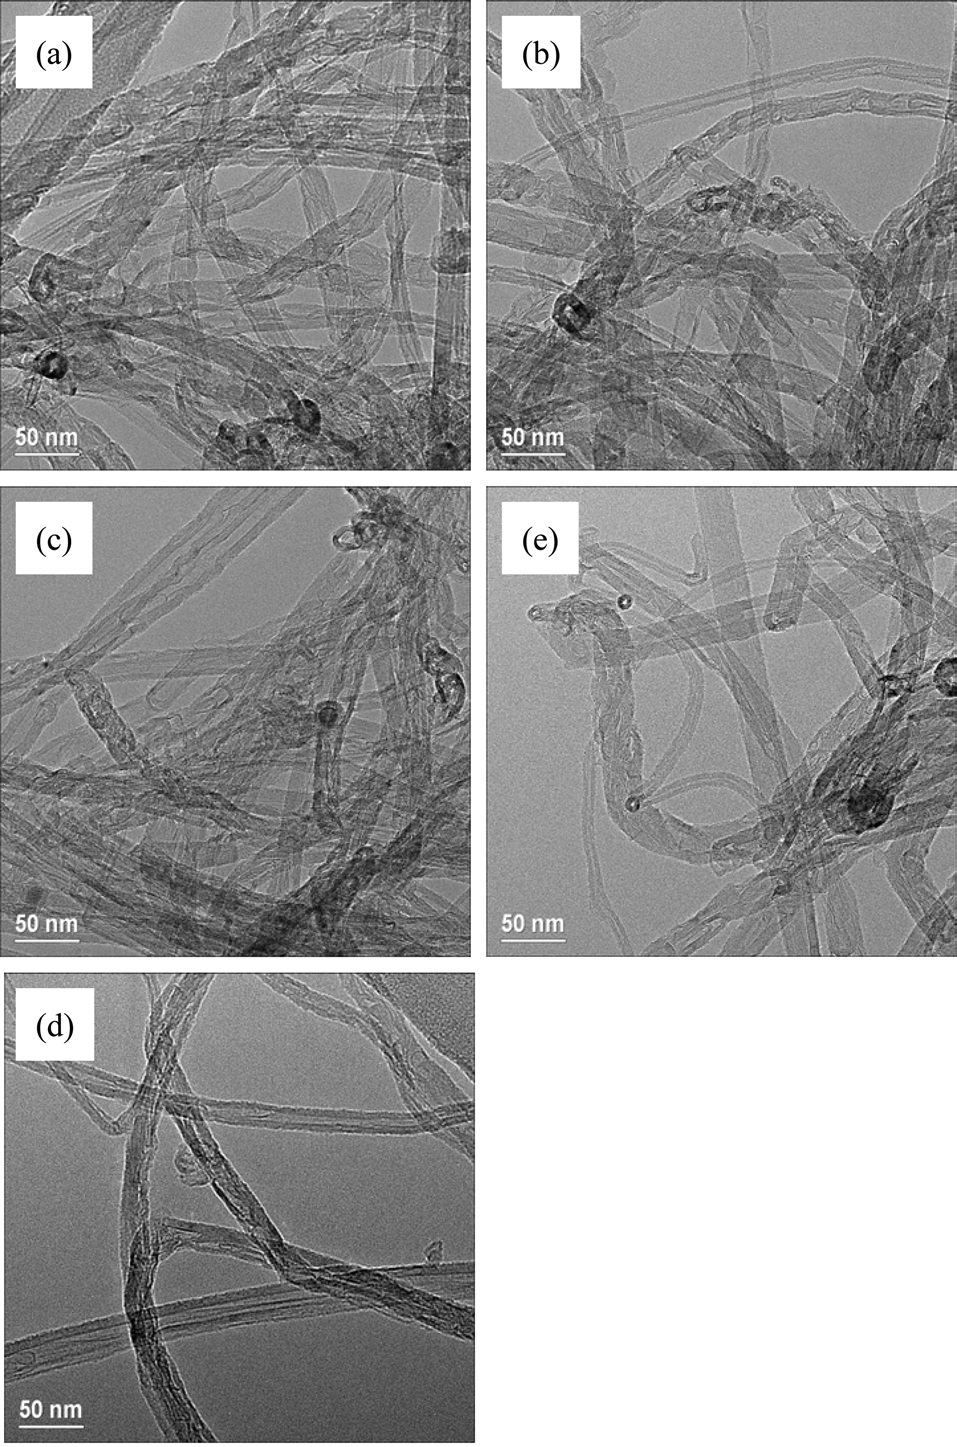 Transmission electron microscope images of carbon nanotubes grown with different contents of Mo and Fe in catalysts; (a) Mo/Fe = 0.058/0.127, (b) Mo/Fe = 0.029/0.127, (c) Mo/Fe = 0.015/0.063, (d) Mo/Fe = 0.011/0.048 and (e) Mo/Fe = 0.009/0.038.